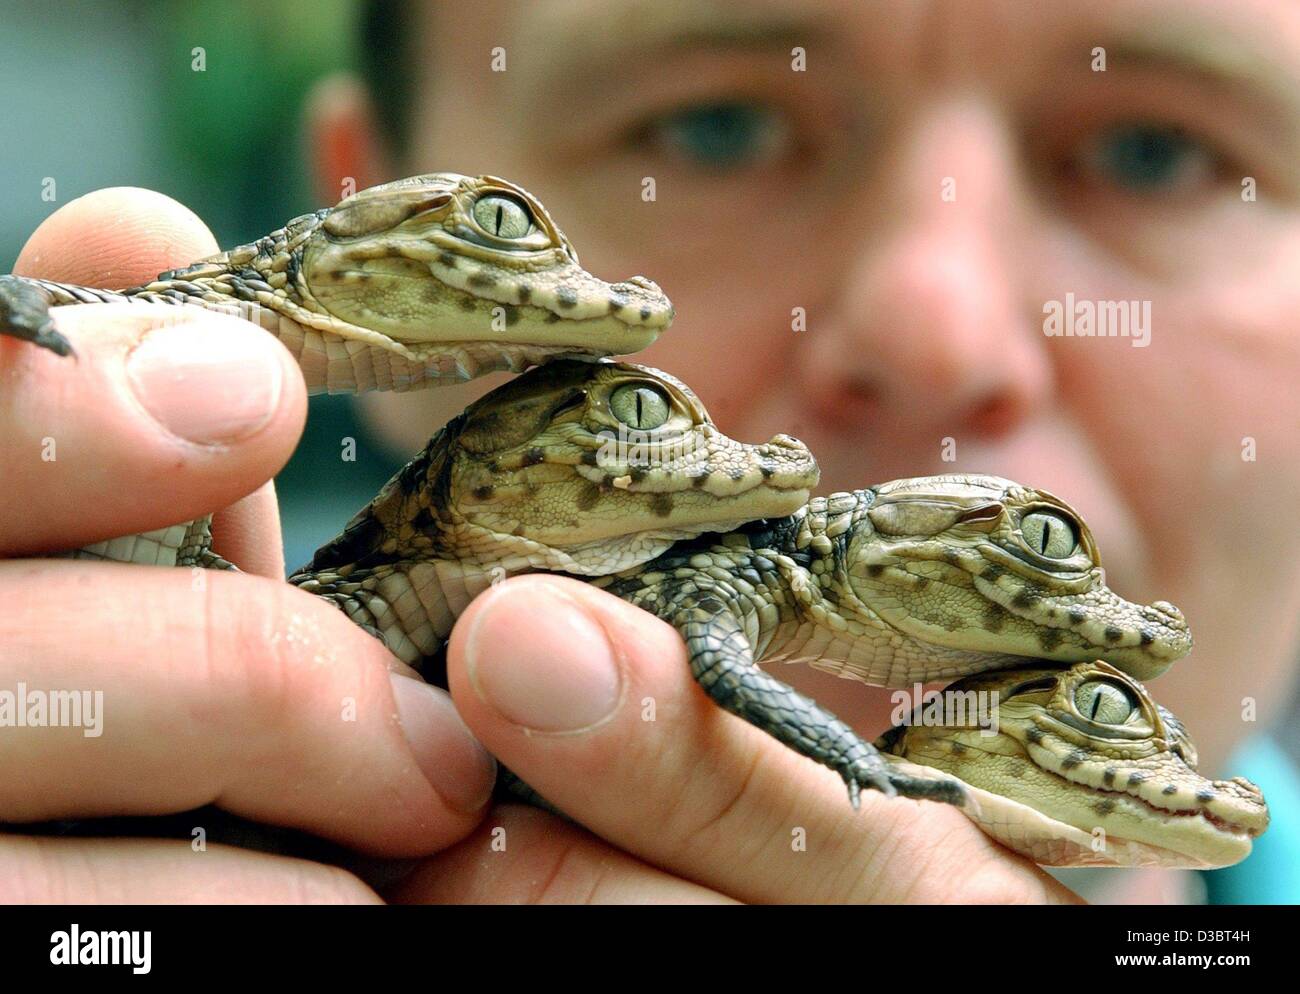 (dpa) - Shop owner <b>Torsten Seibt</b> holds up four spectacled caiman babies only ... - dpa-shop-owner-torsten-seibt-holds-up-four-spectacled-caiman-babies-D3BT4H